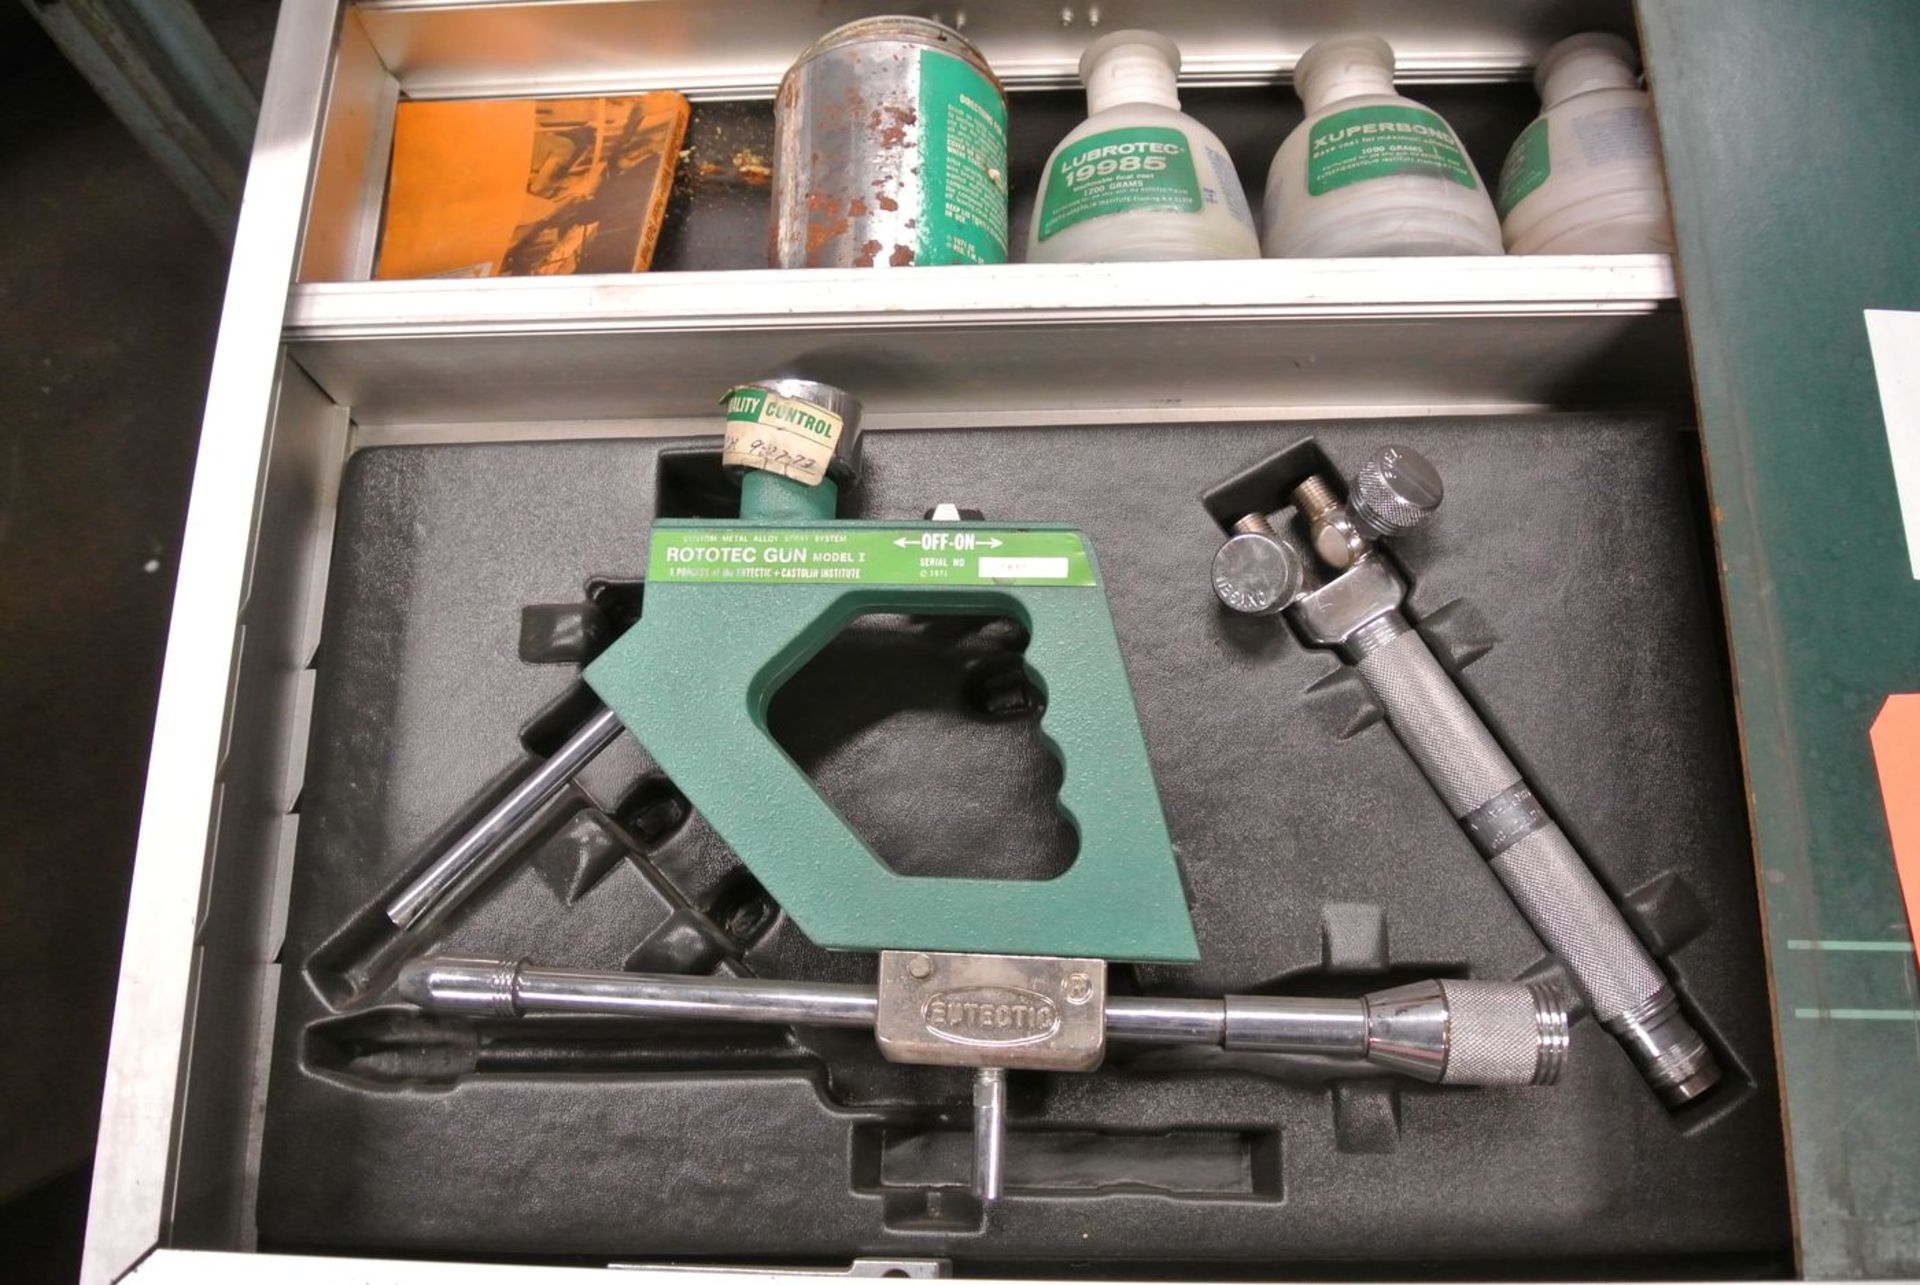 Eutectic RoToTeC Model I Custom Metal Alloy Spray System, S/N: 12990; with Case - Image 2 of 3